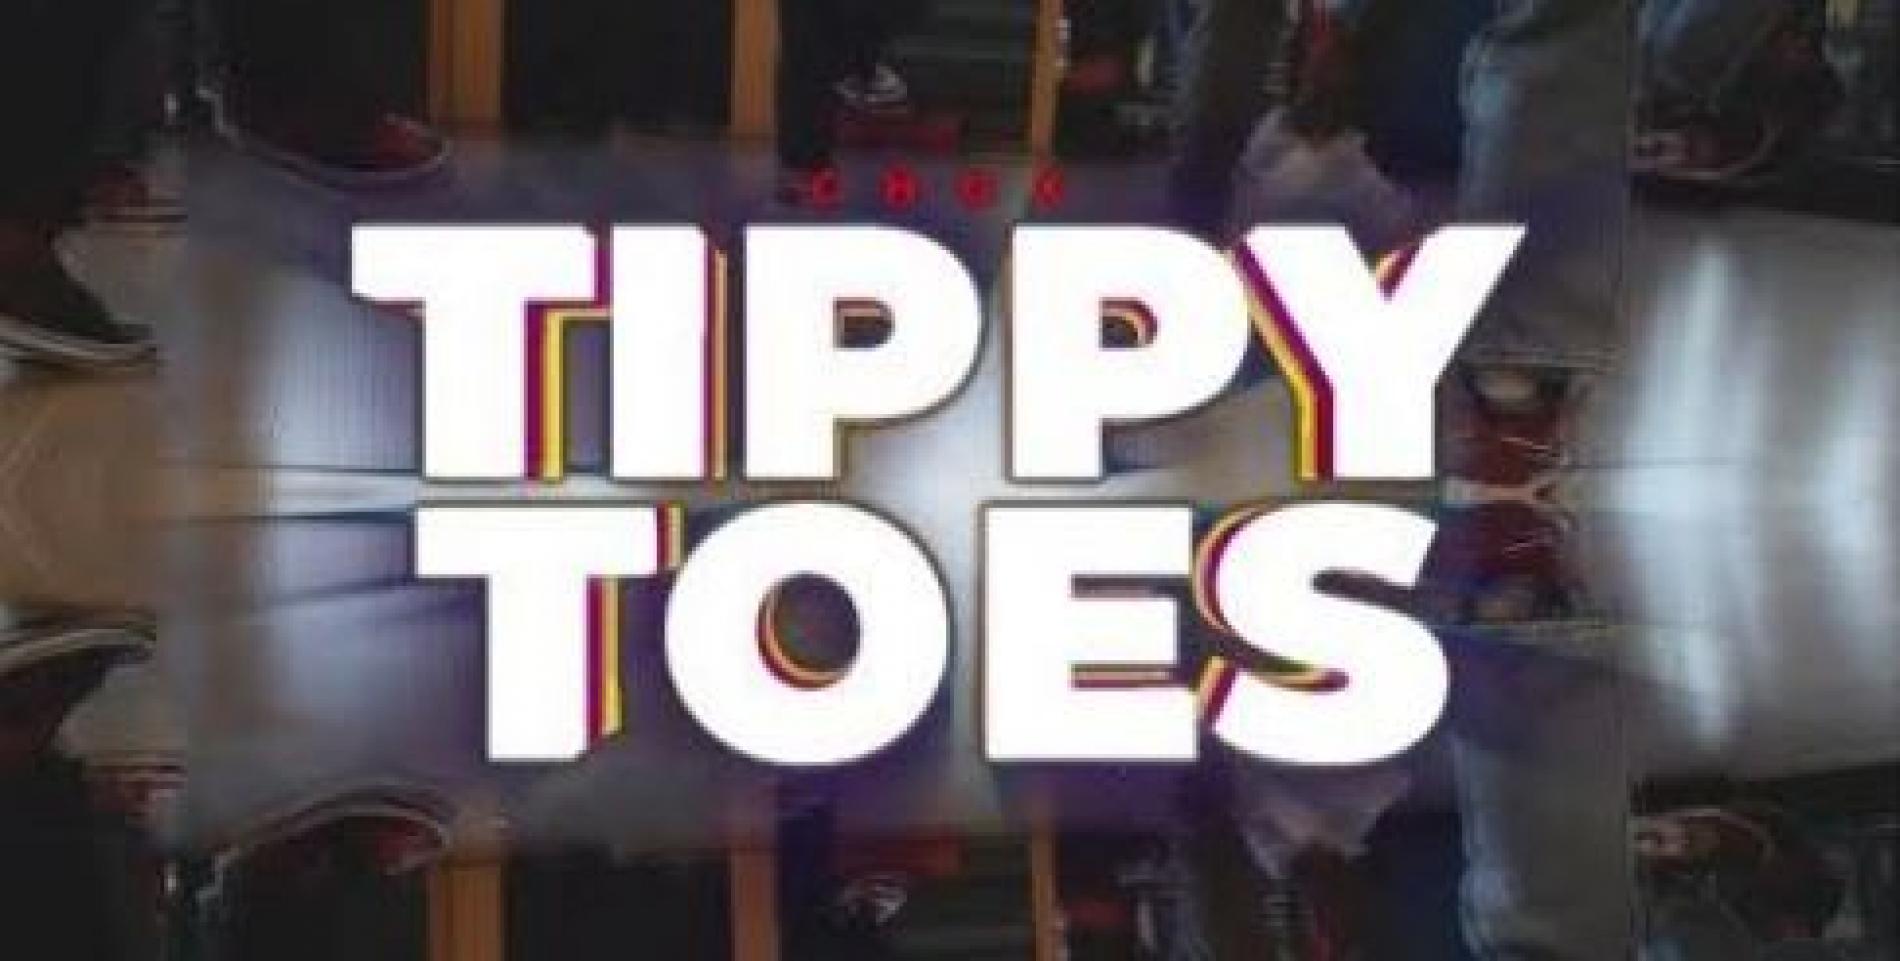 New Music : Chux – Tippy Toes [Official Music Video]